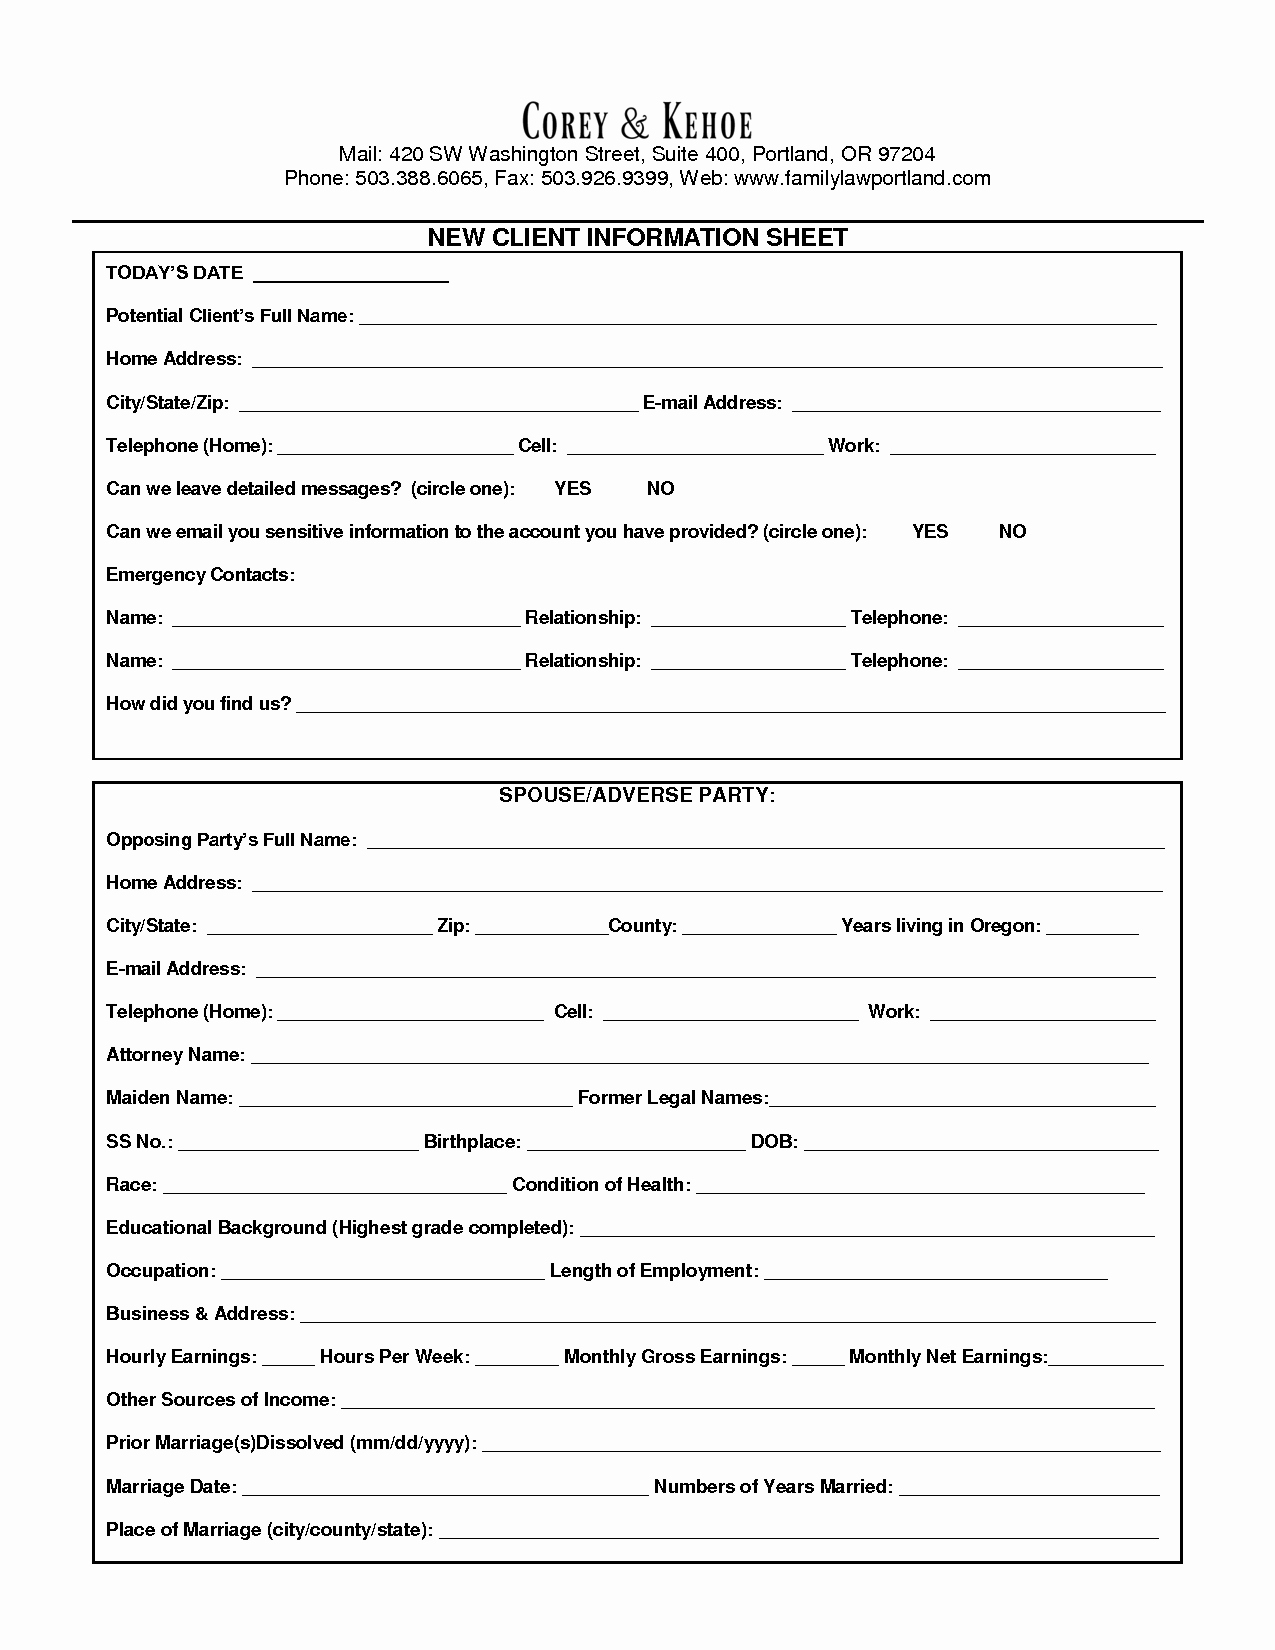 Customer Information Form Template Excel Dbp File Pdf Throughout Customer Information Card Template